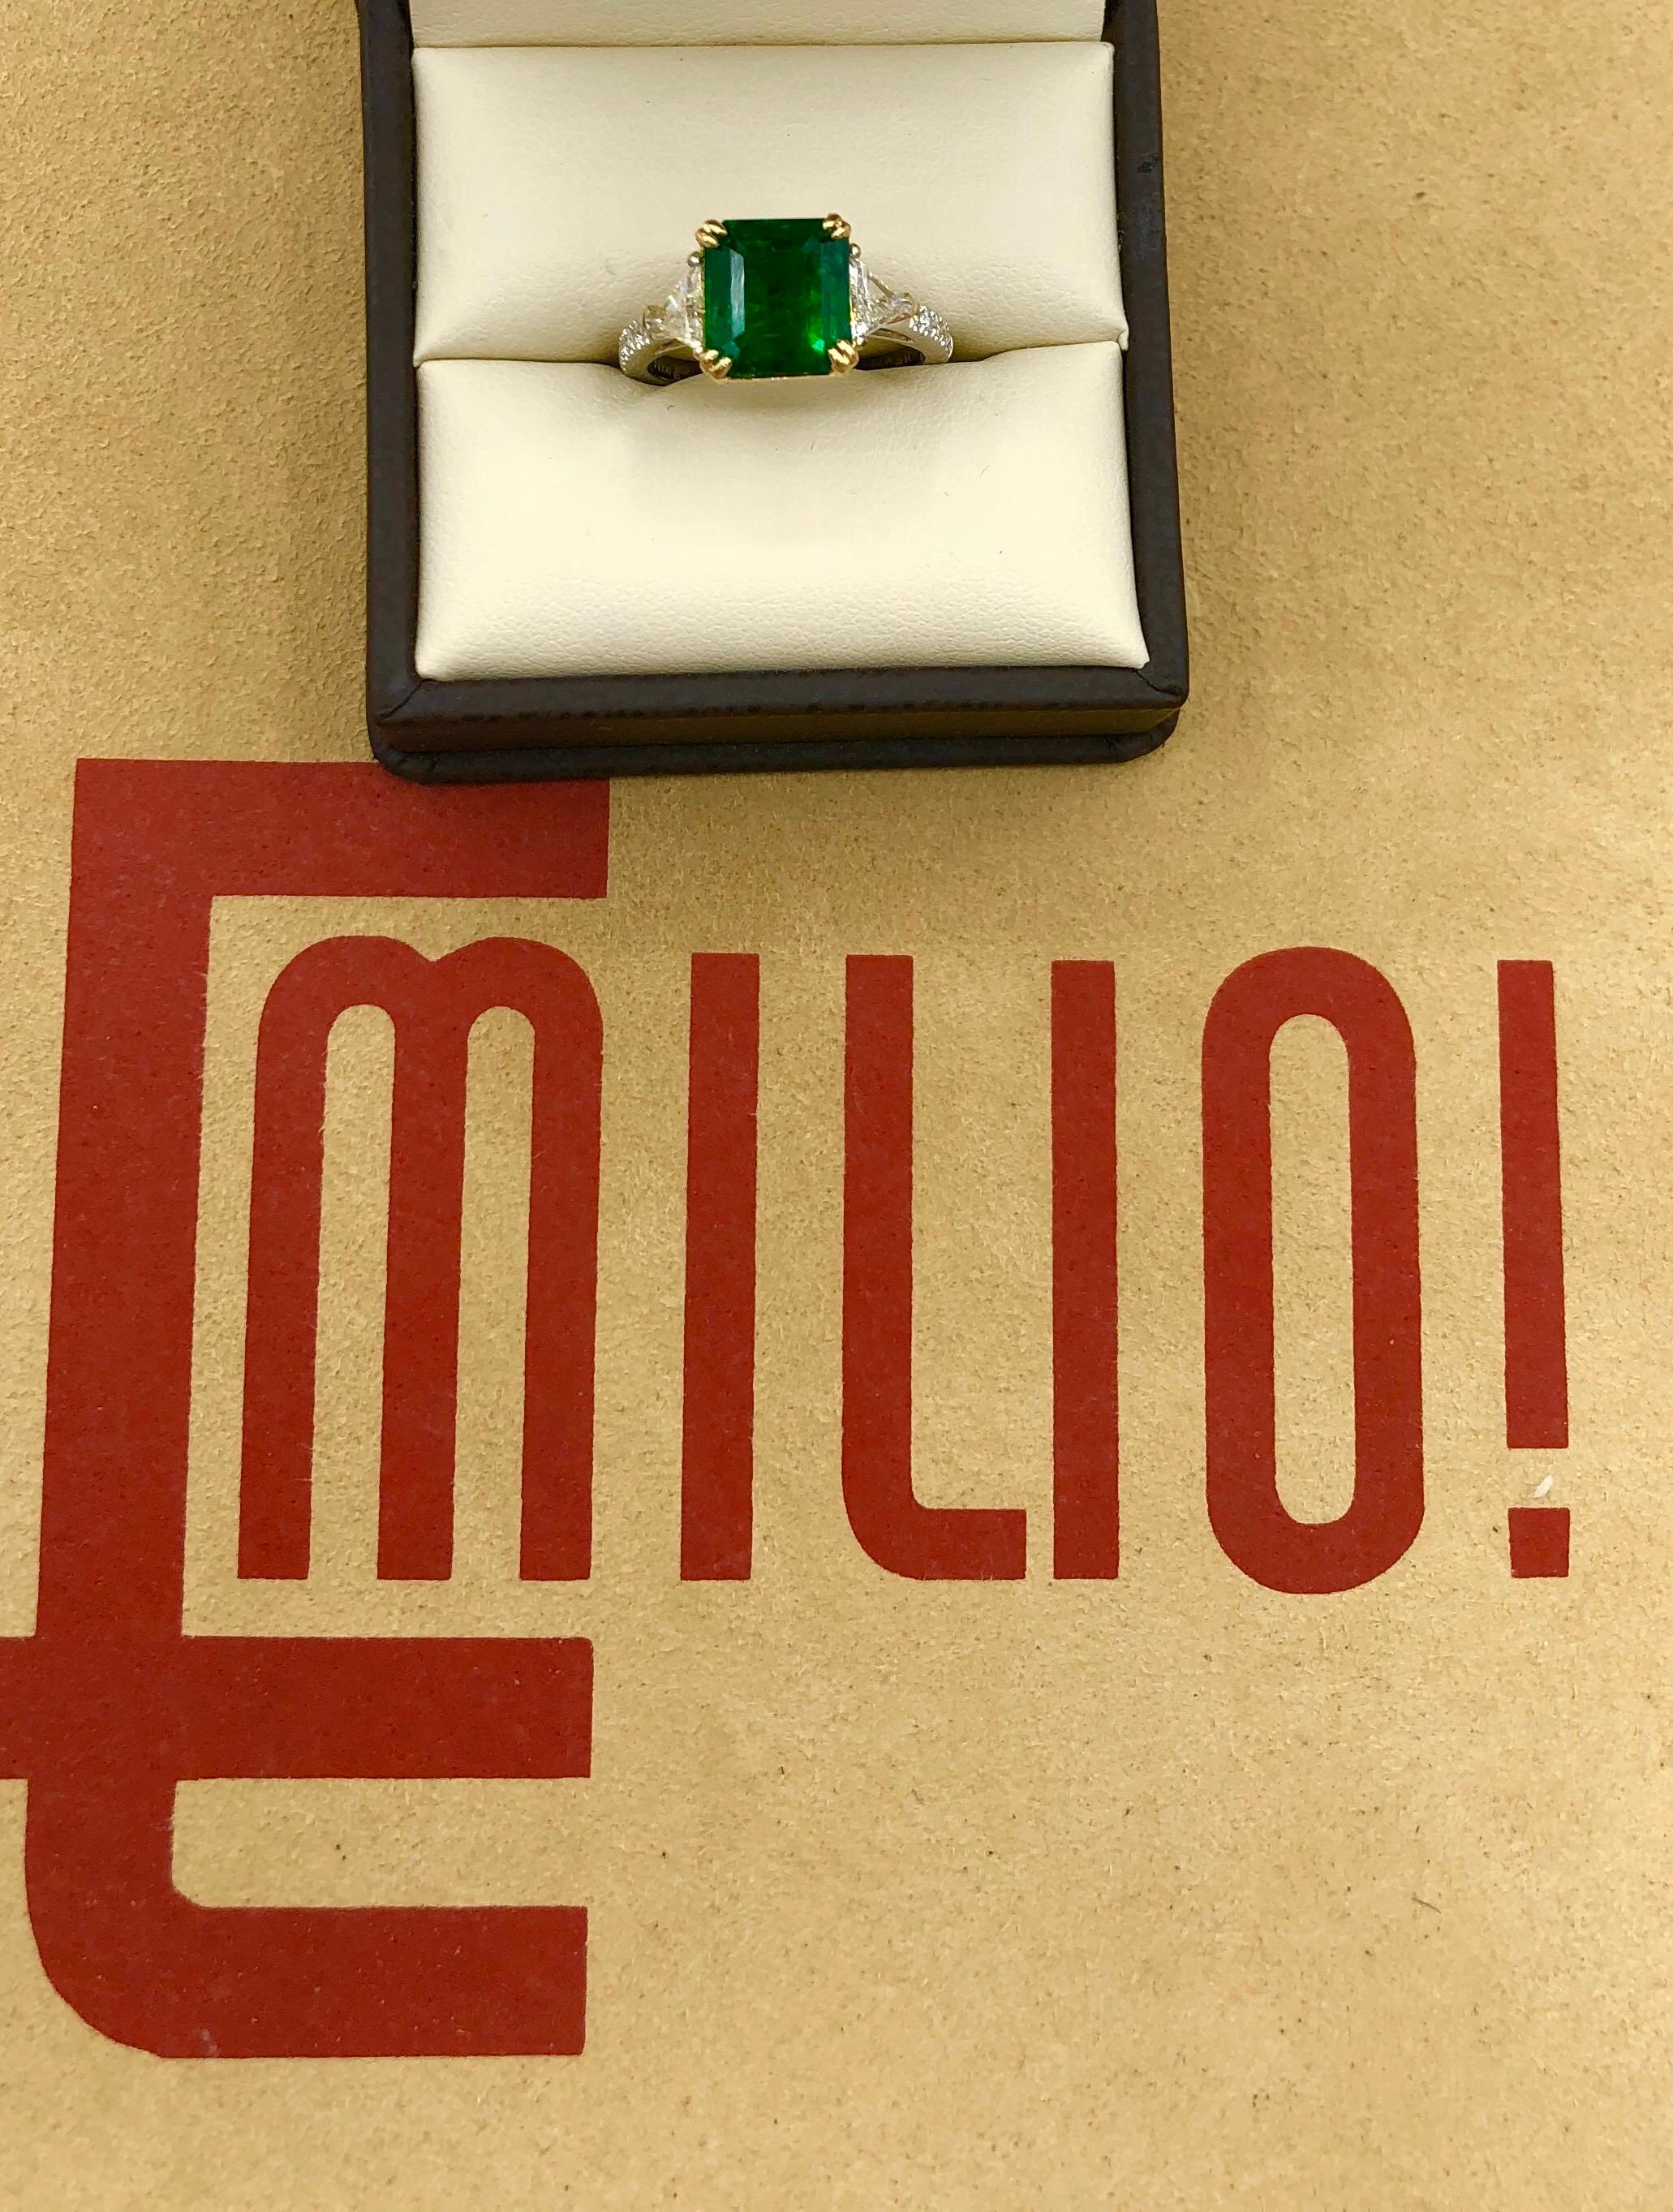 Emilio Jewelry 3.72 Carat Gia Certified Vivid Green Emerald Diamond Ring In New Condition For Sale In New York, NY